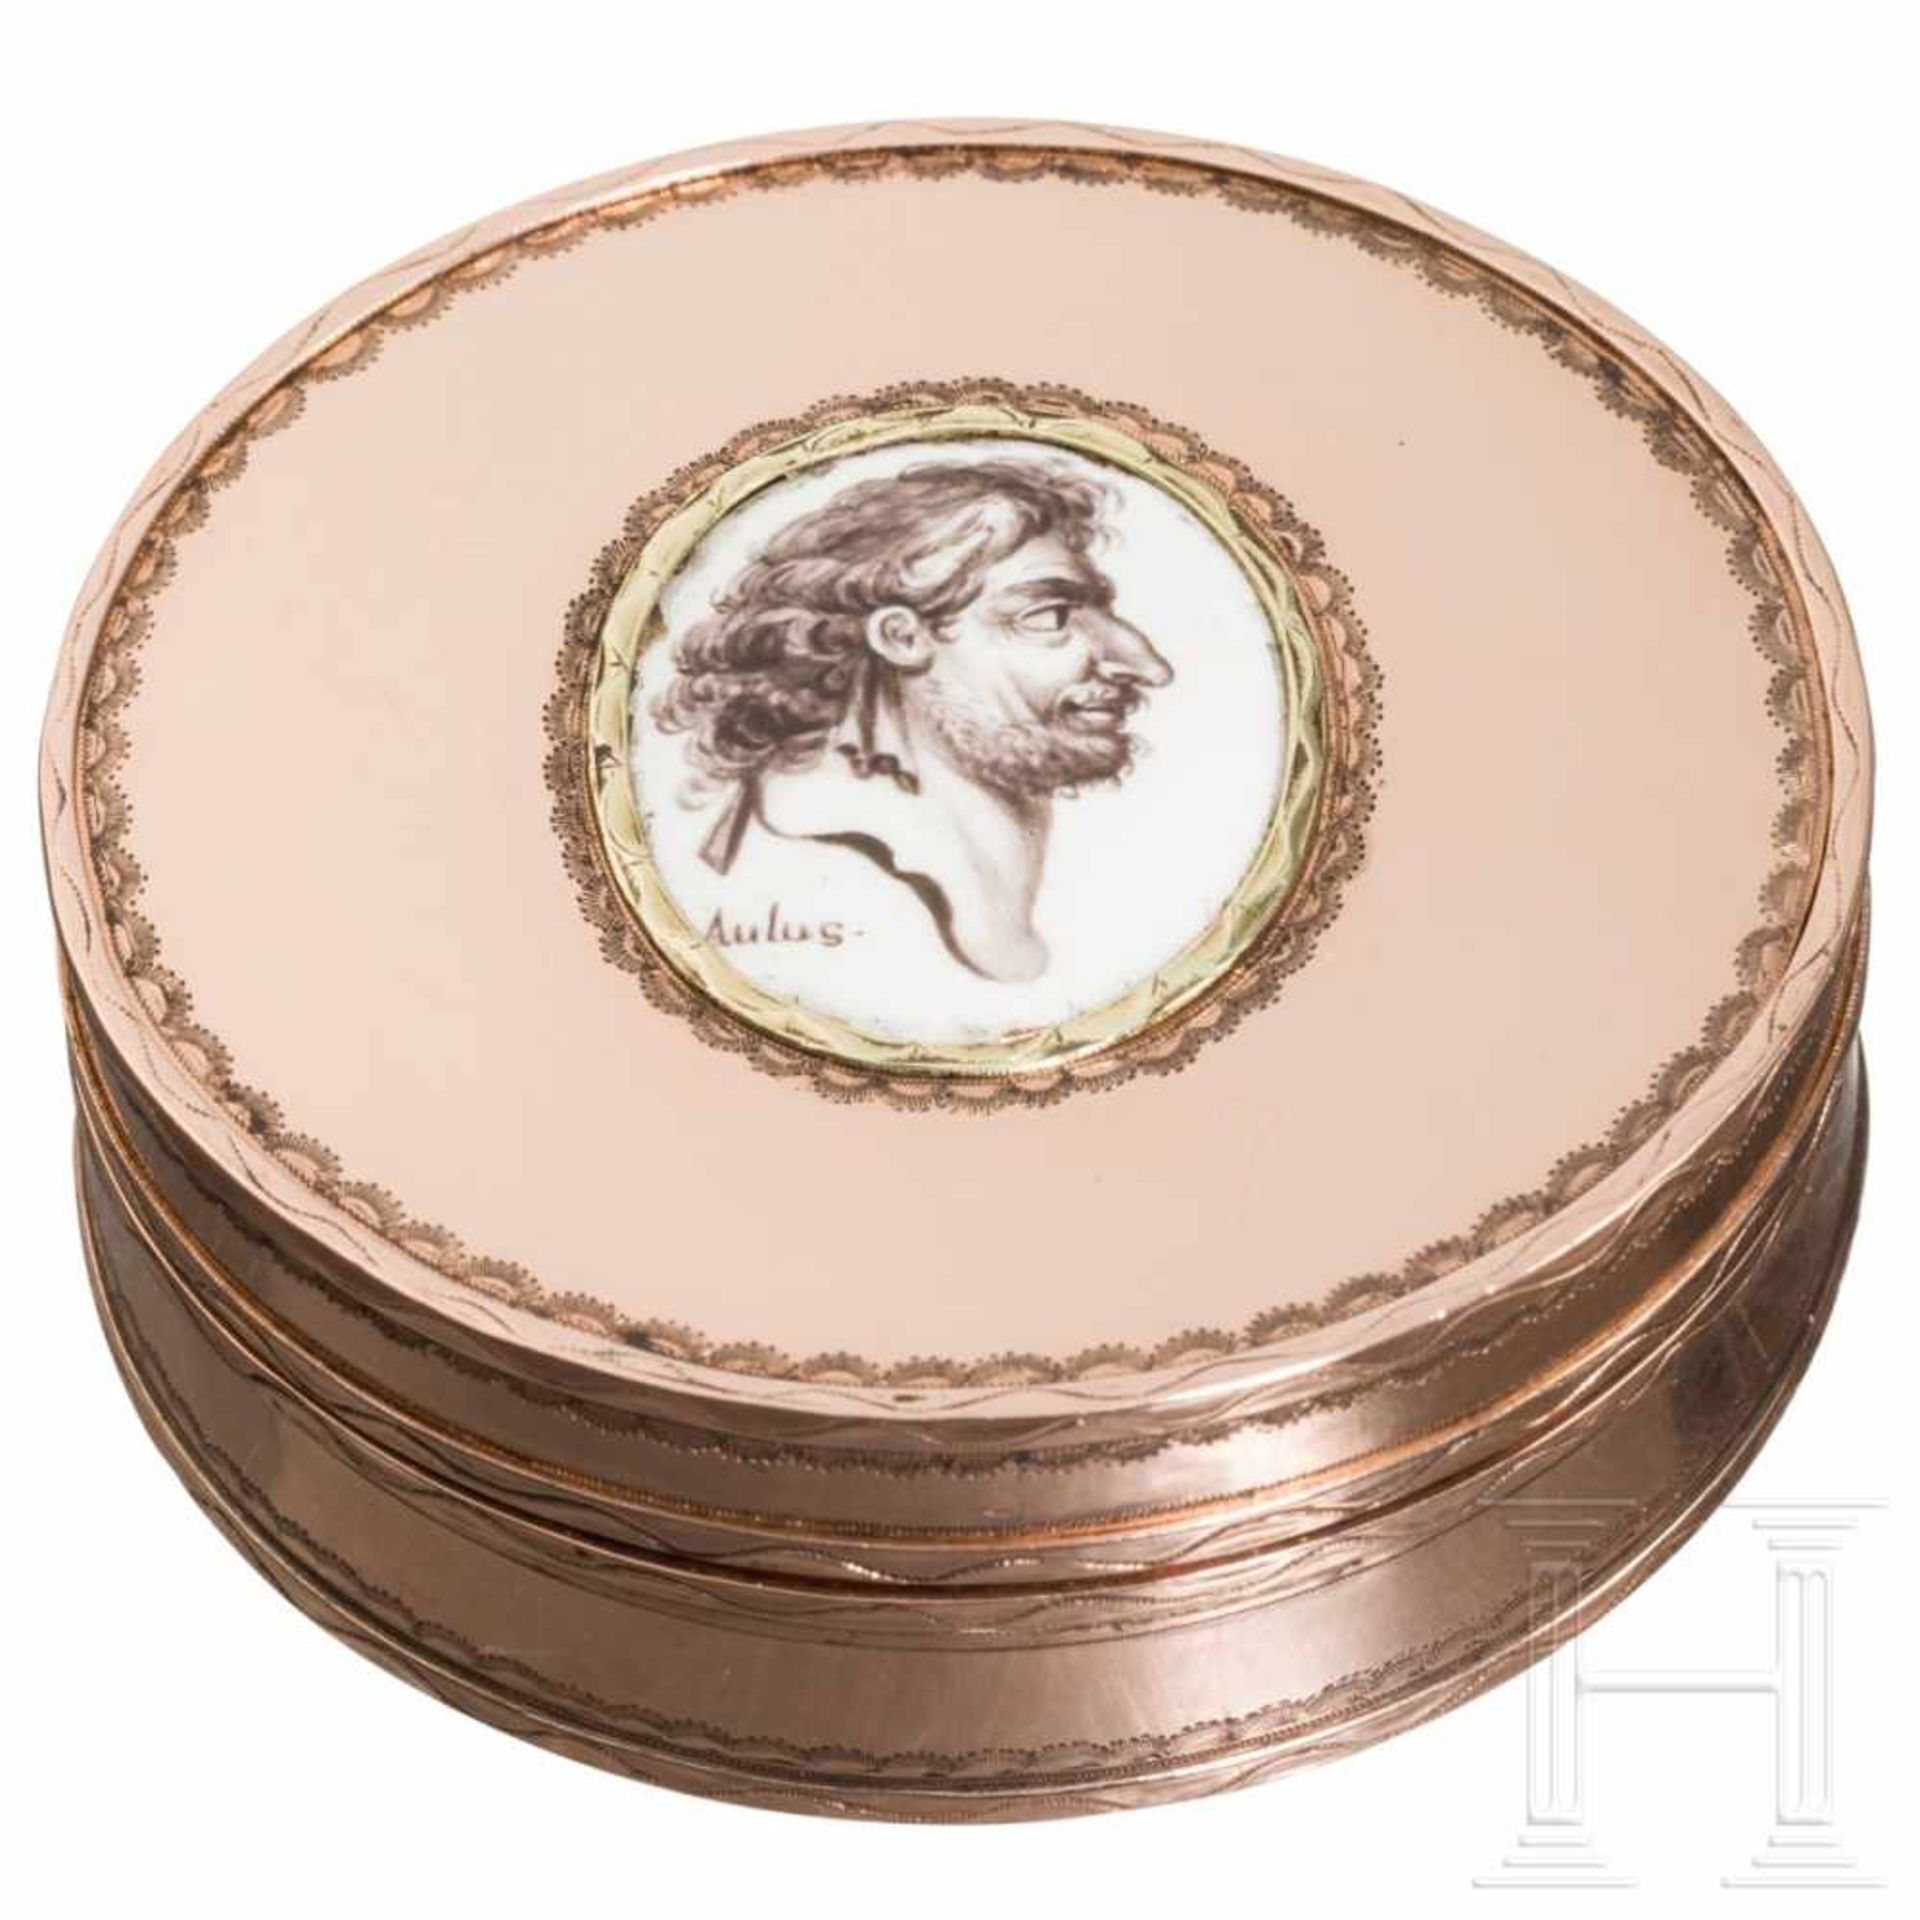 A French courtly pillbox with a portrait of the physician Aulus Cornelius Celsus, 18th century, from